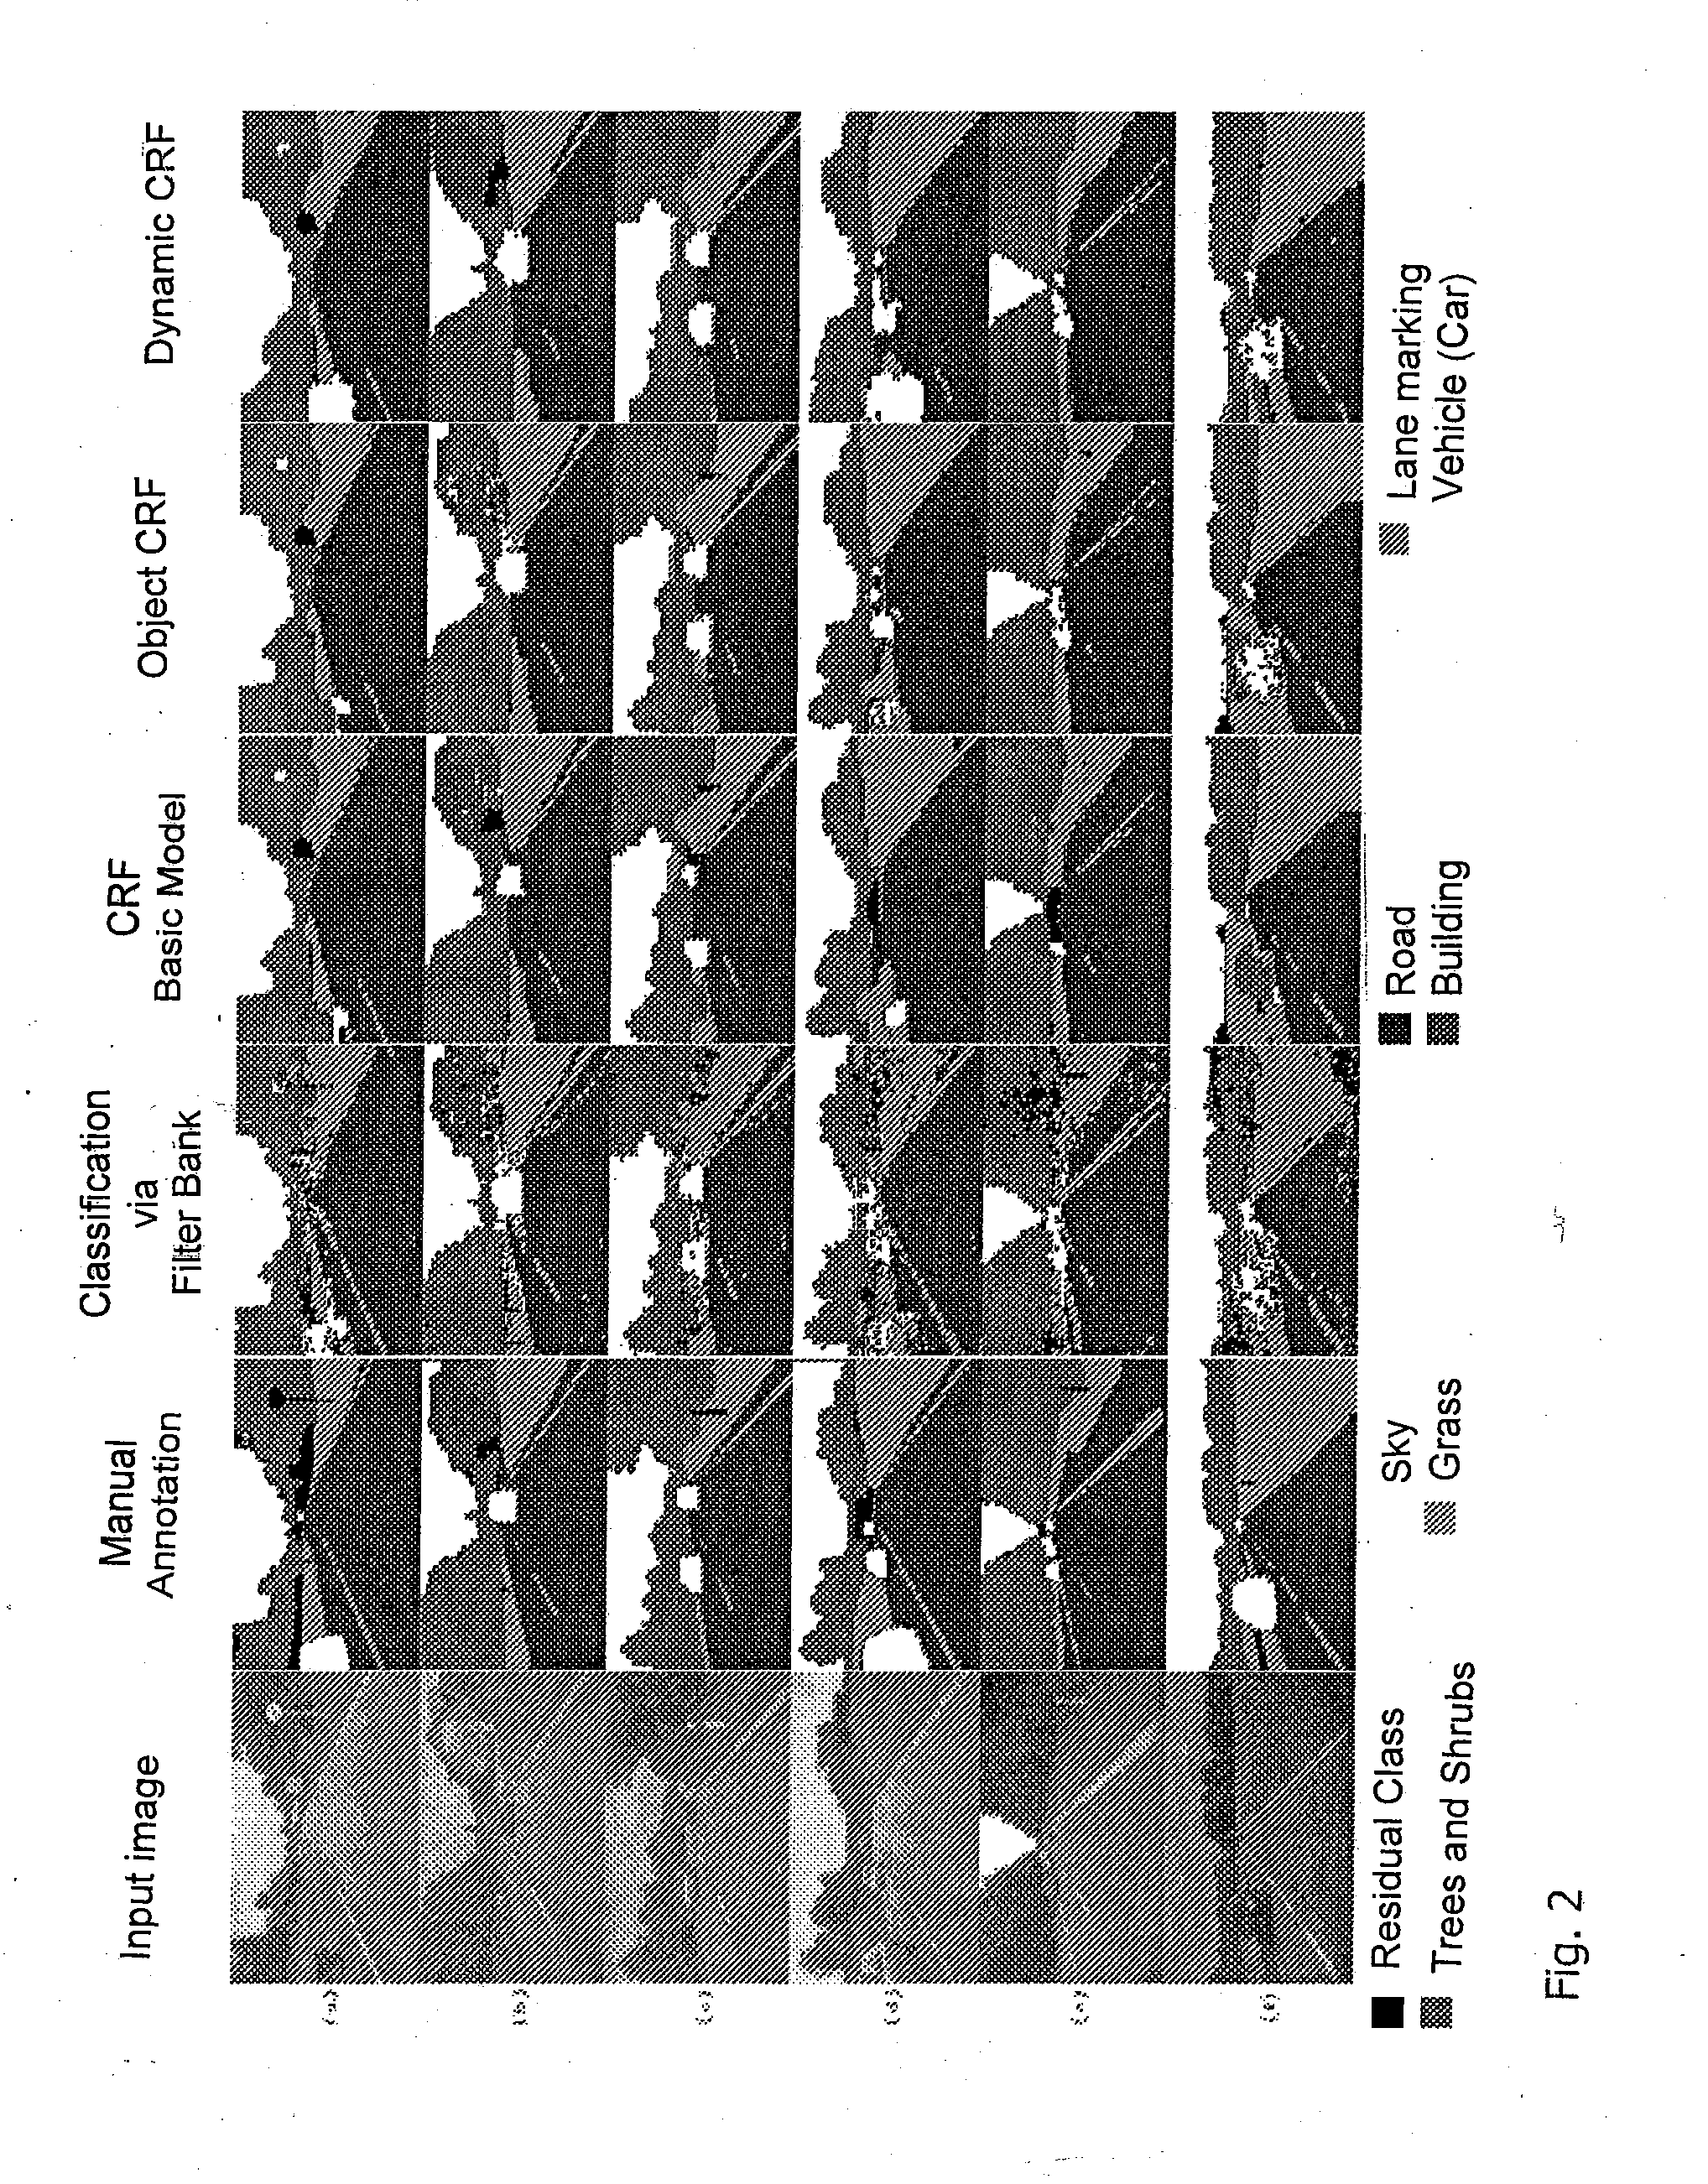 Method and device for analyzing surrounding objects and/or surrounding scenes, such as for object and scene class segmenting